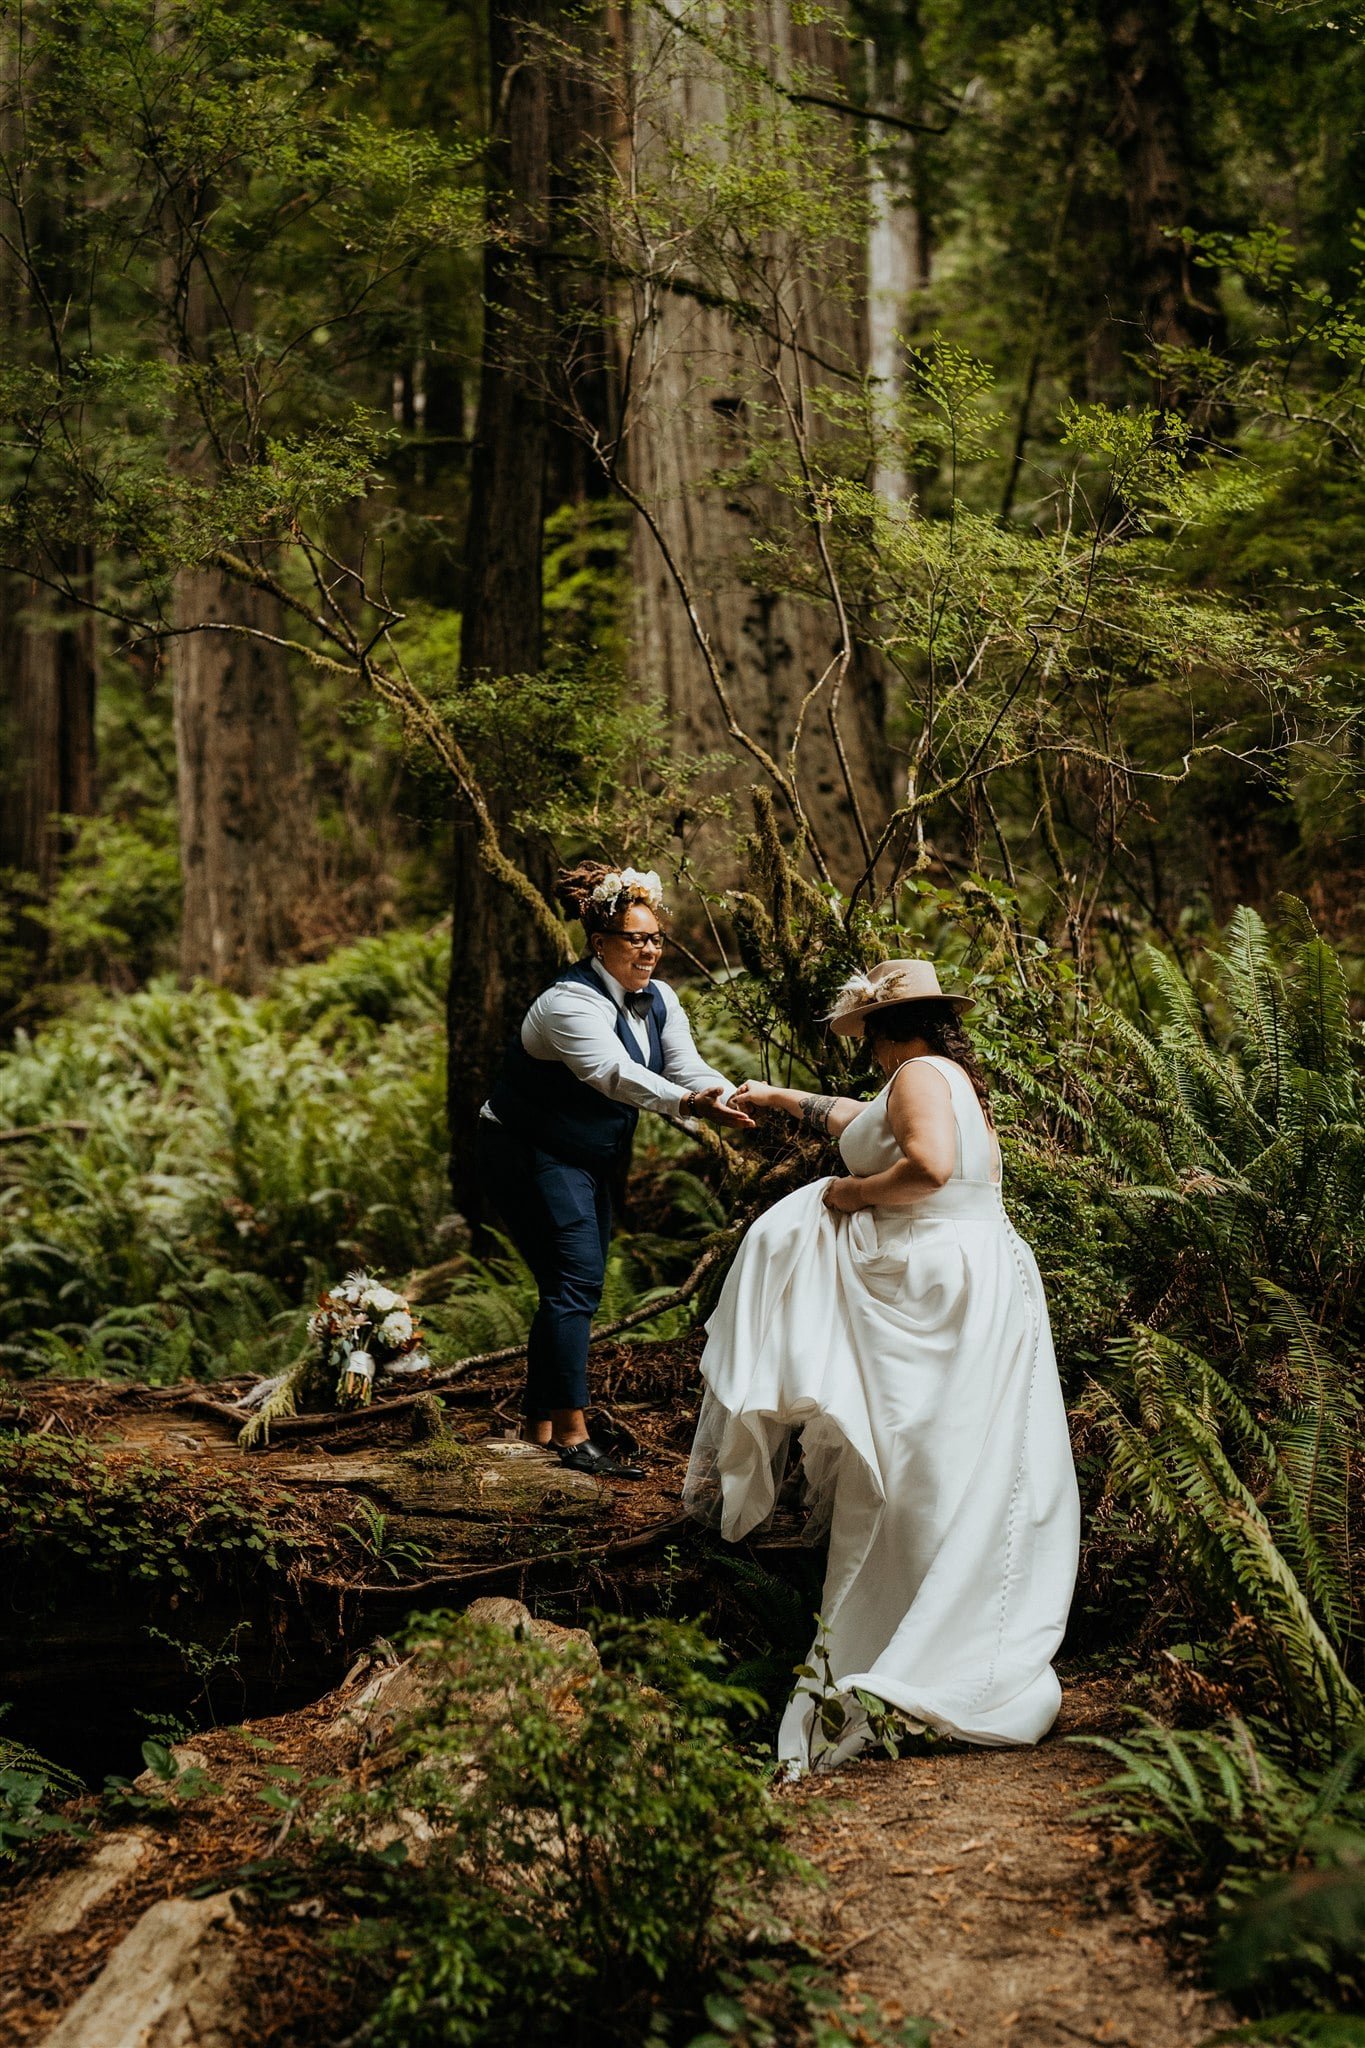 Brides hike through the forest during their Southern Oregon Coast elopement